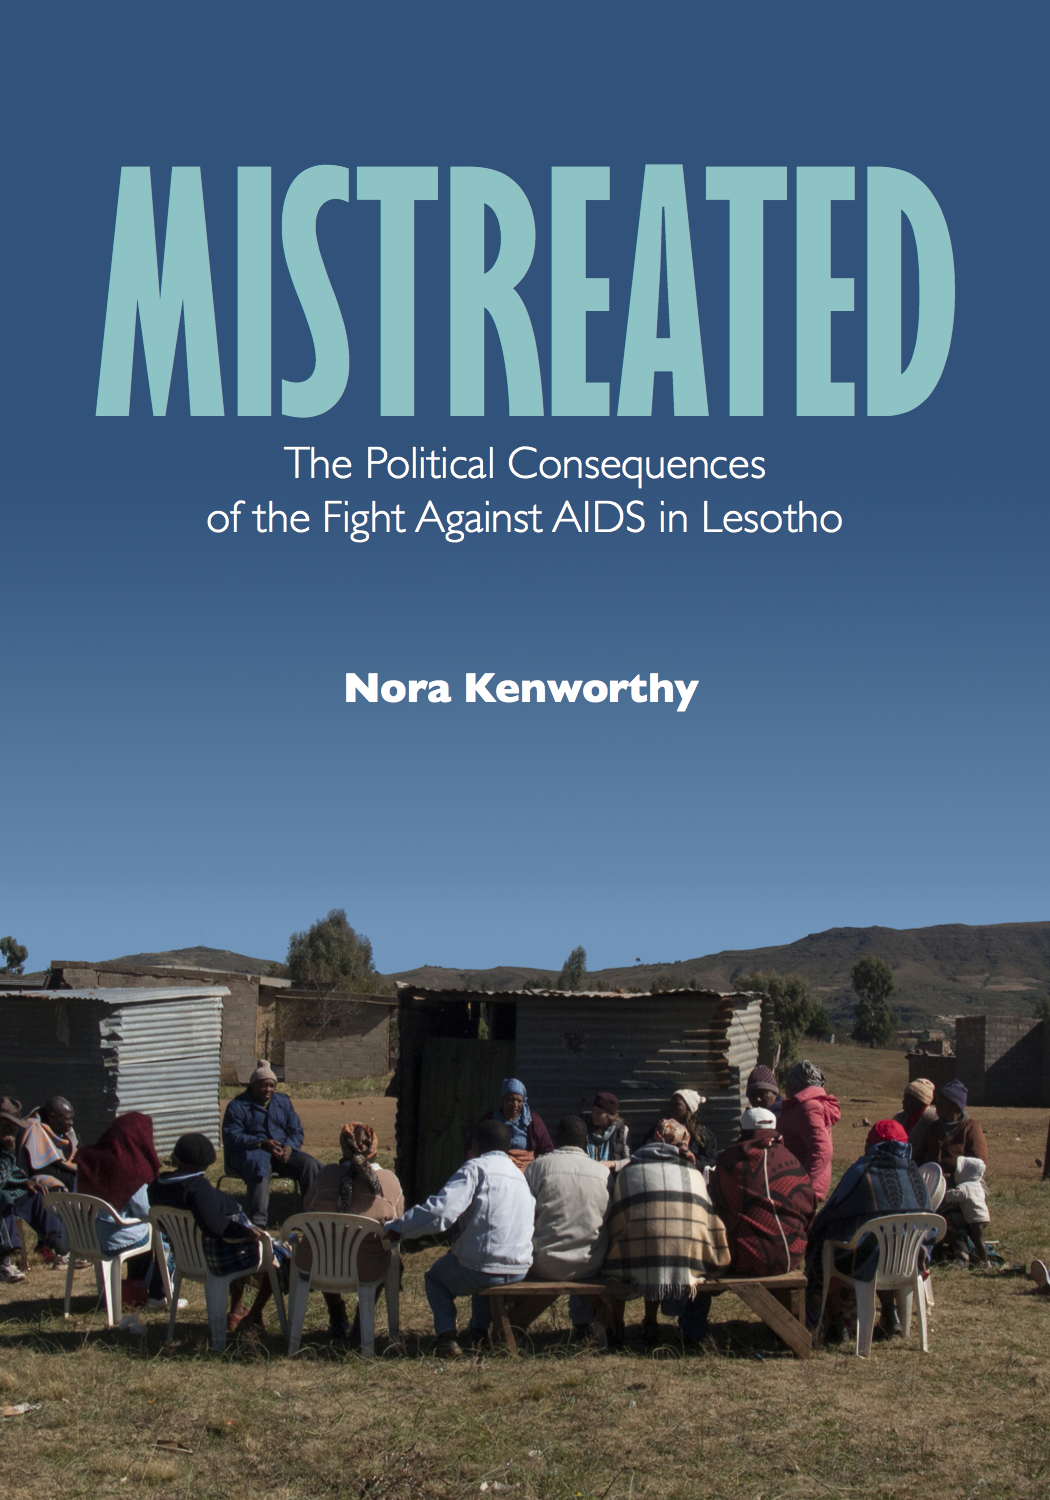 Book cover, "Mistreated"